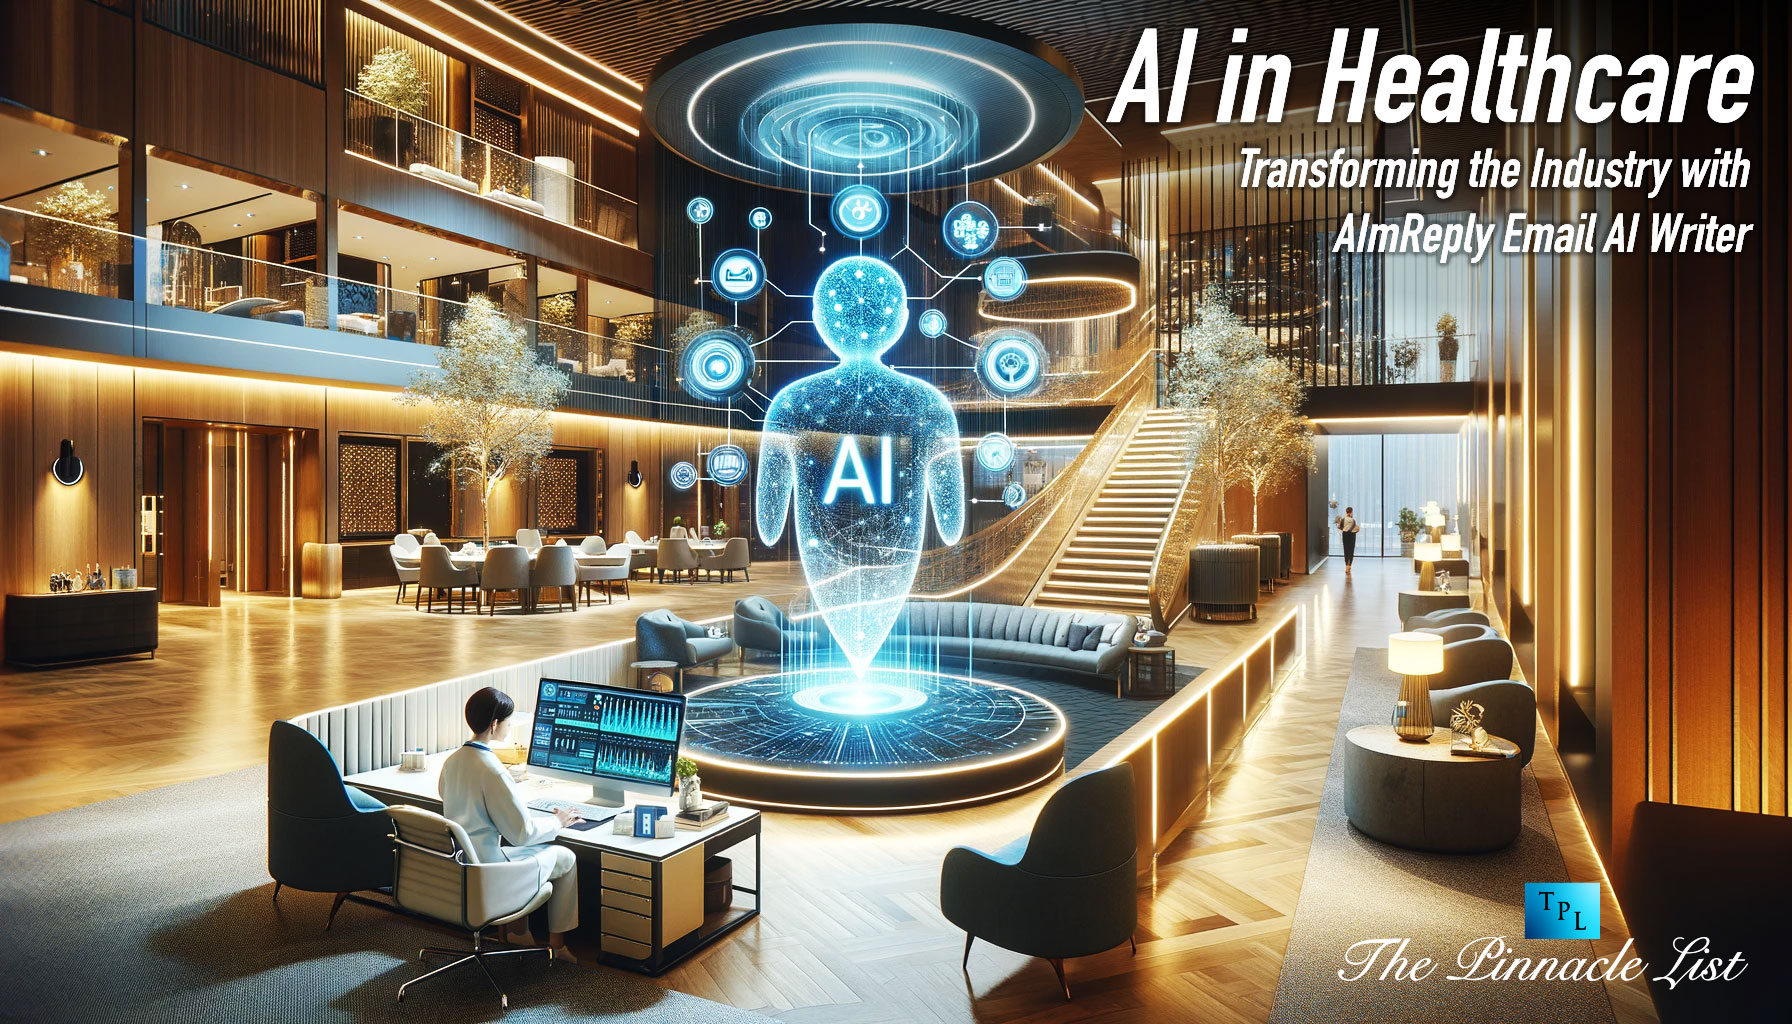 AI in Healthcare: Transforming the Industry with AImReply Email AI Writer